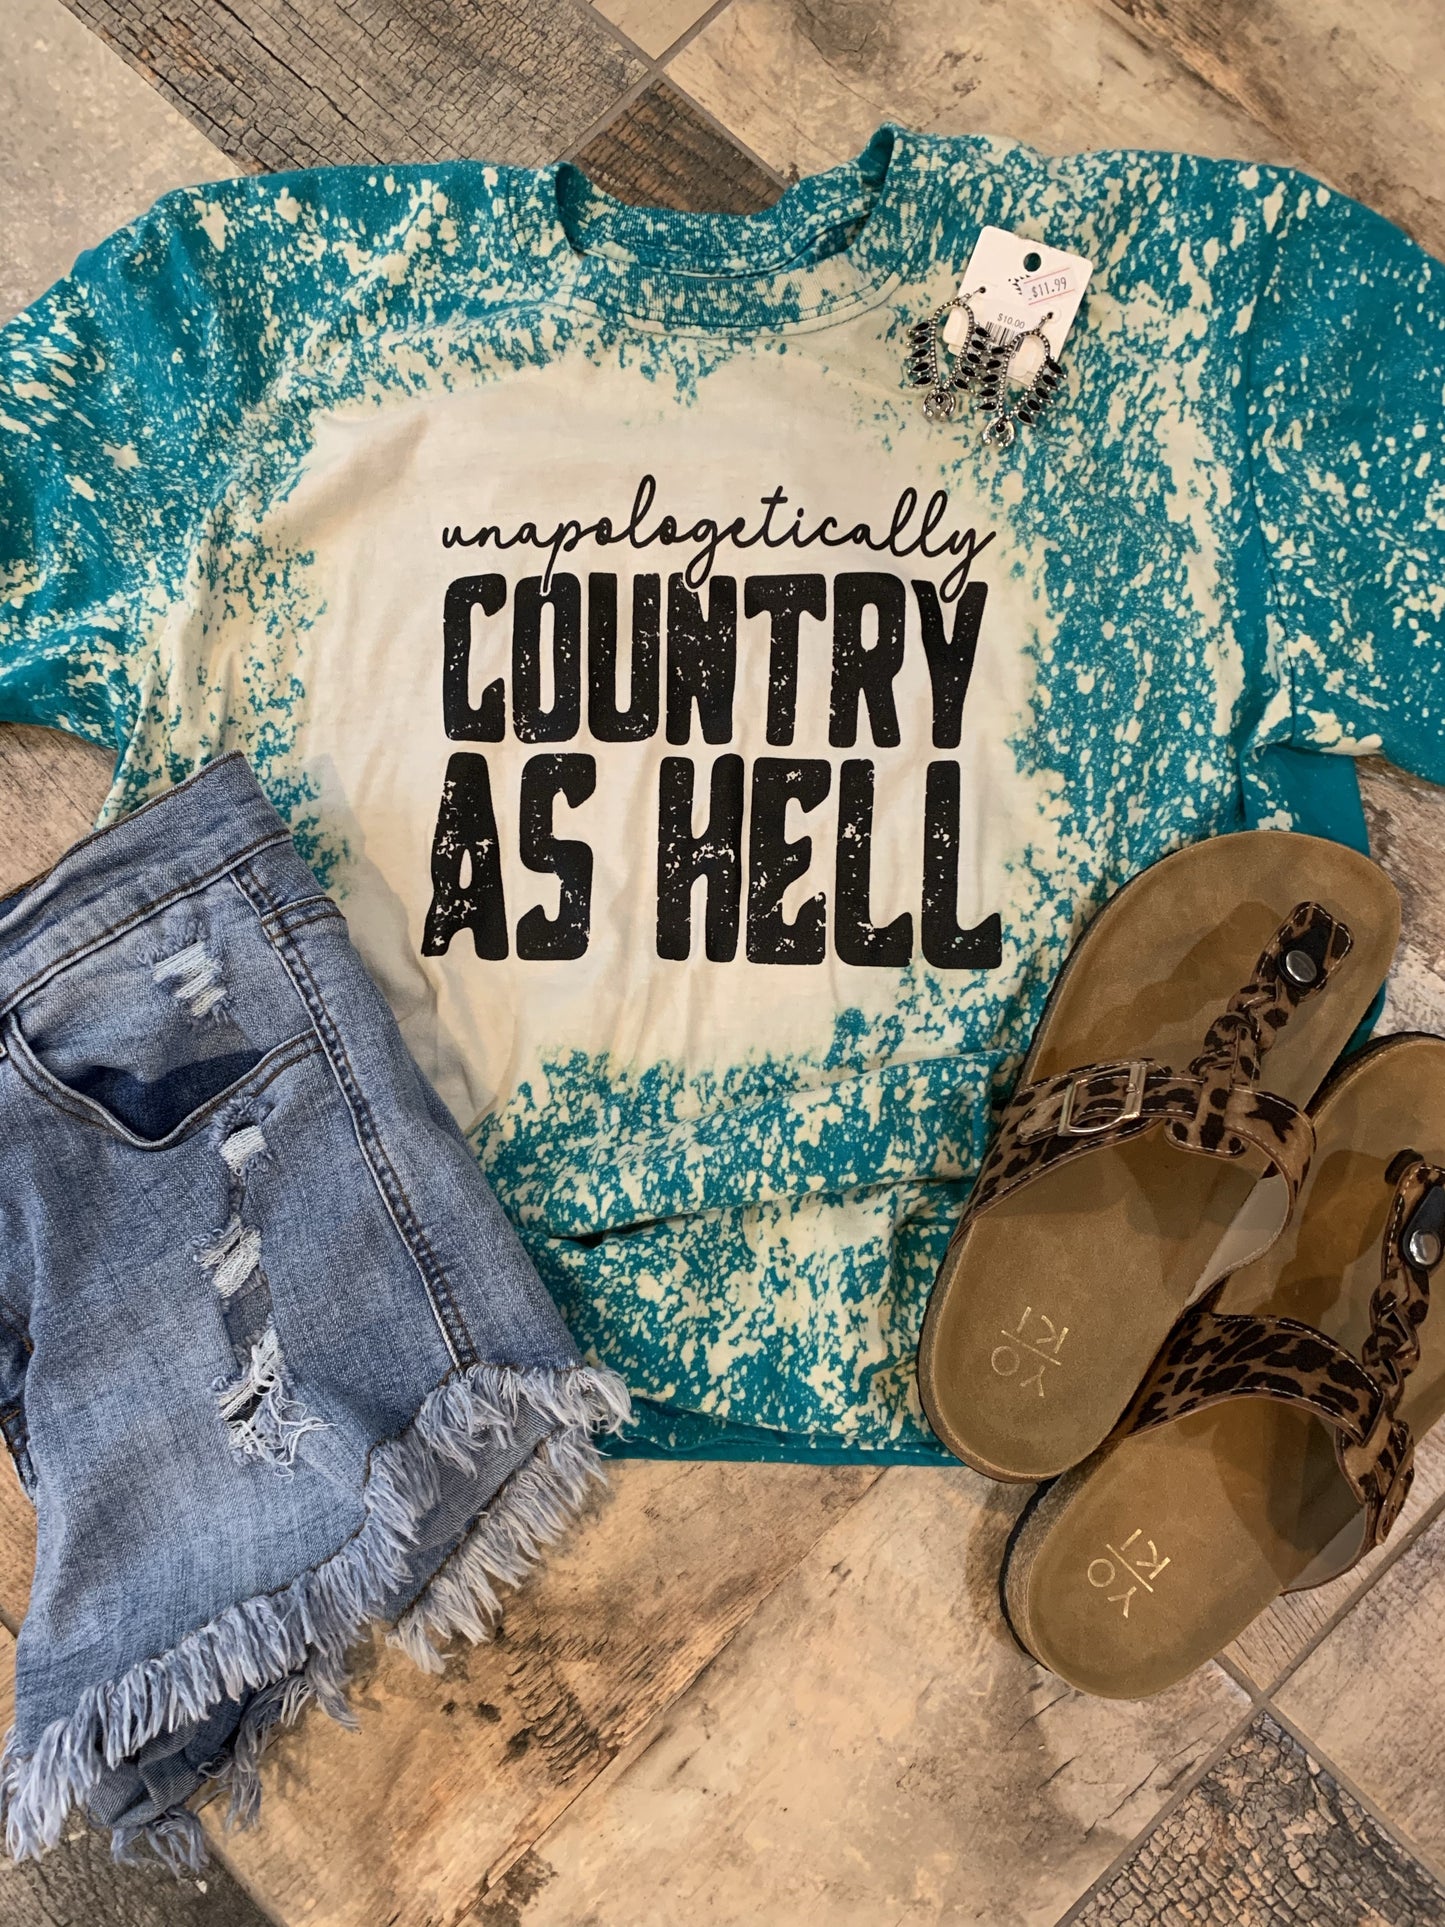 Unapologetically Country as Hell